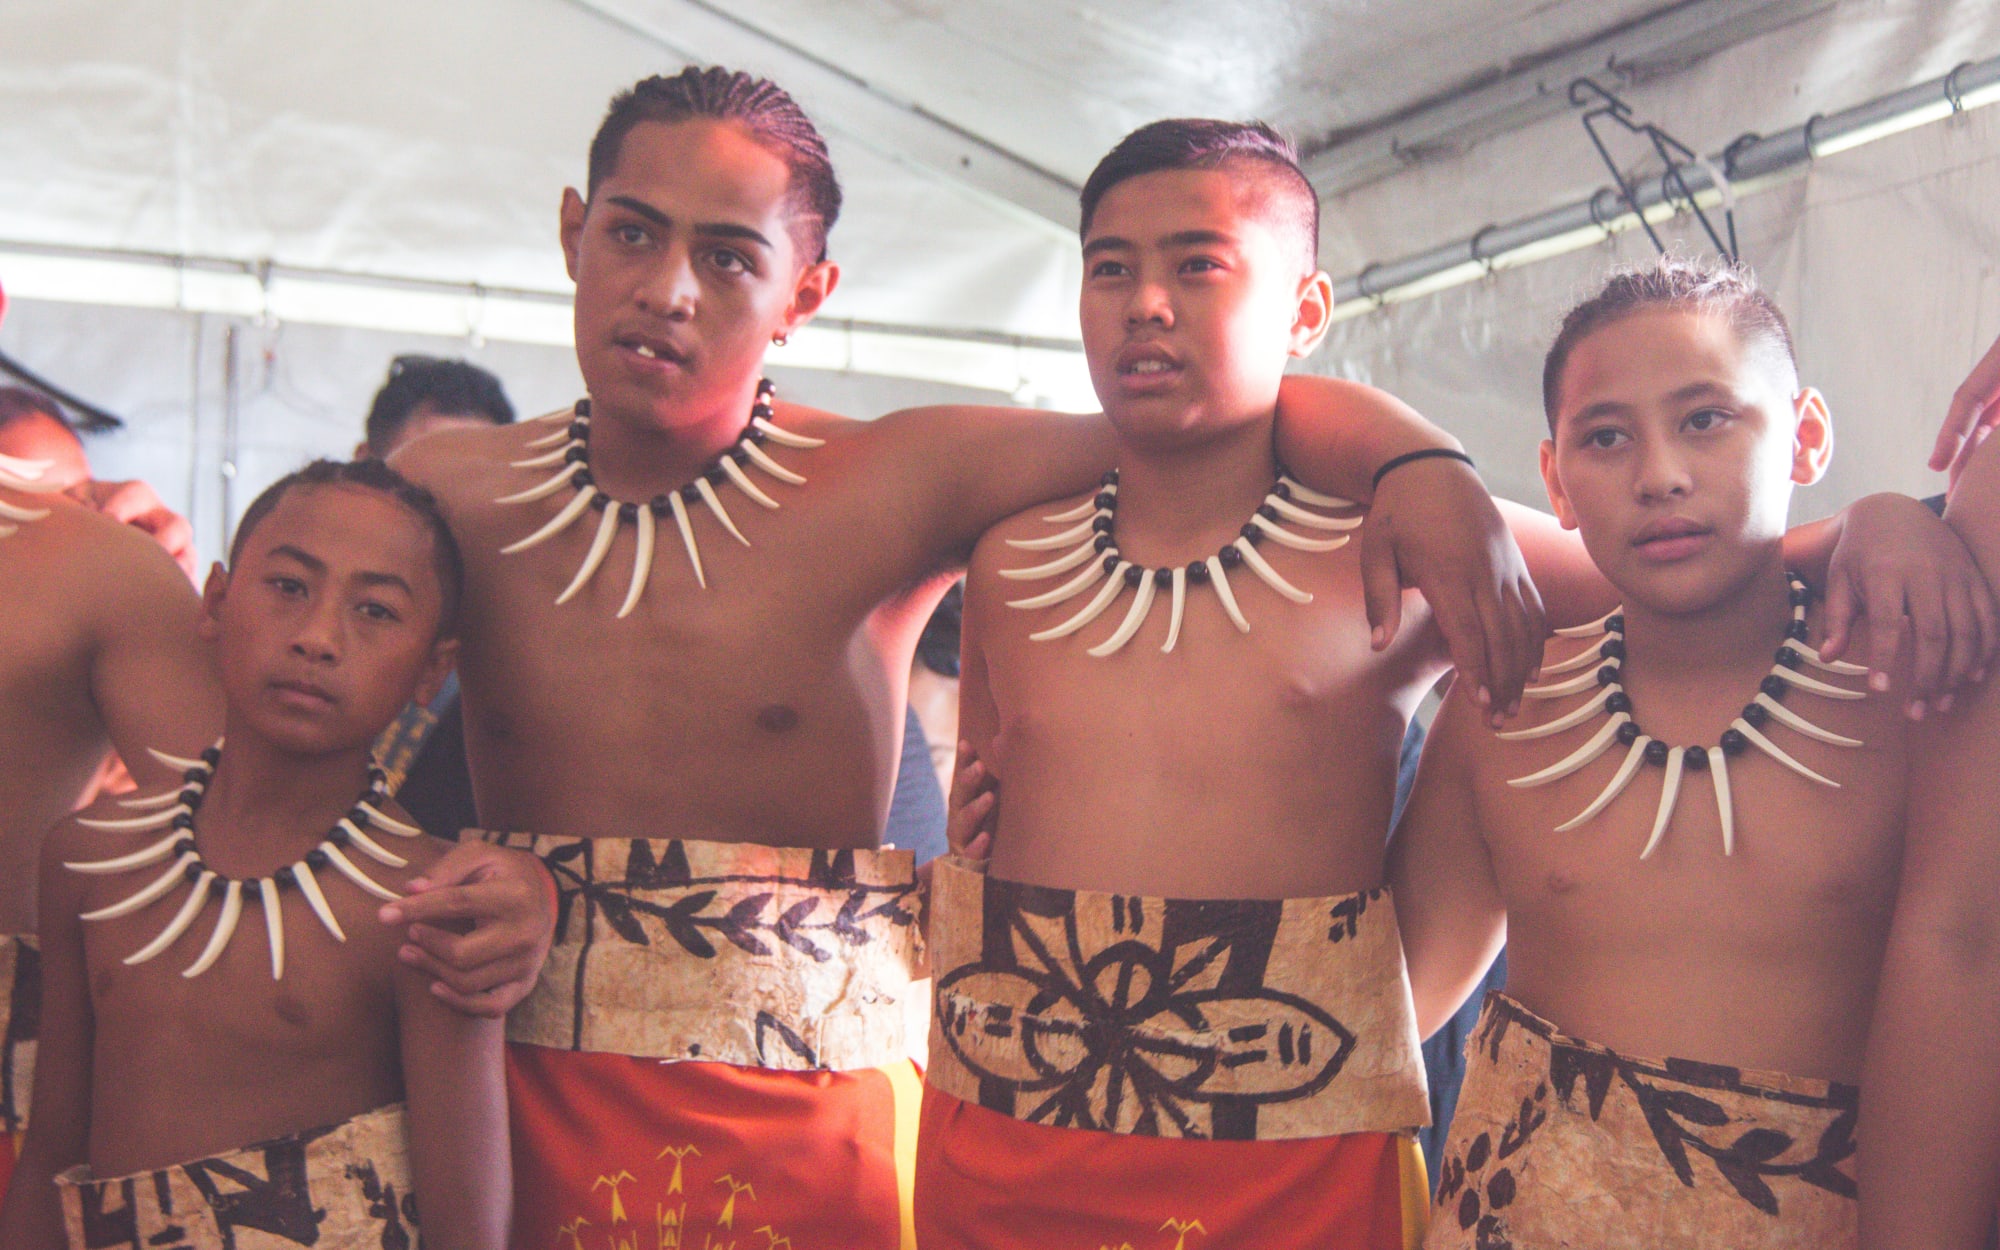 St Paul's College Samoan group students huddle backstage, just before they compete at Polyfest